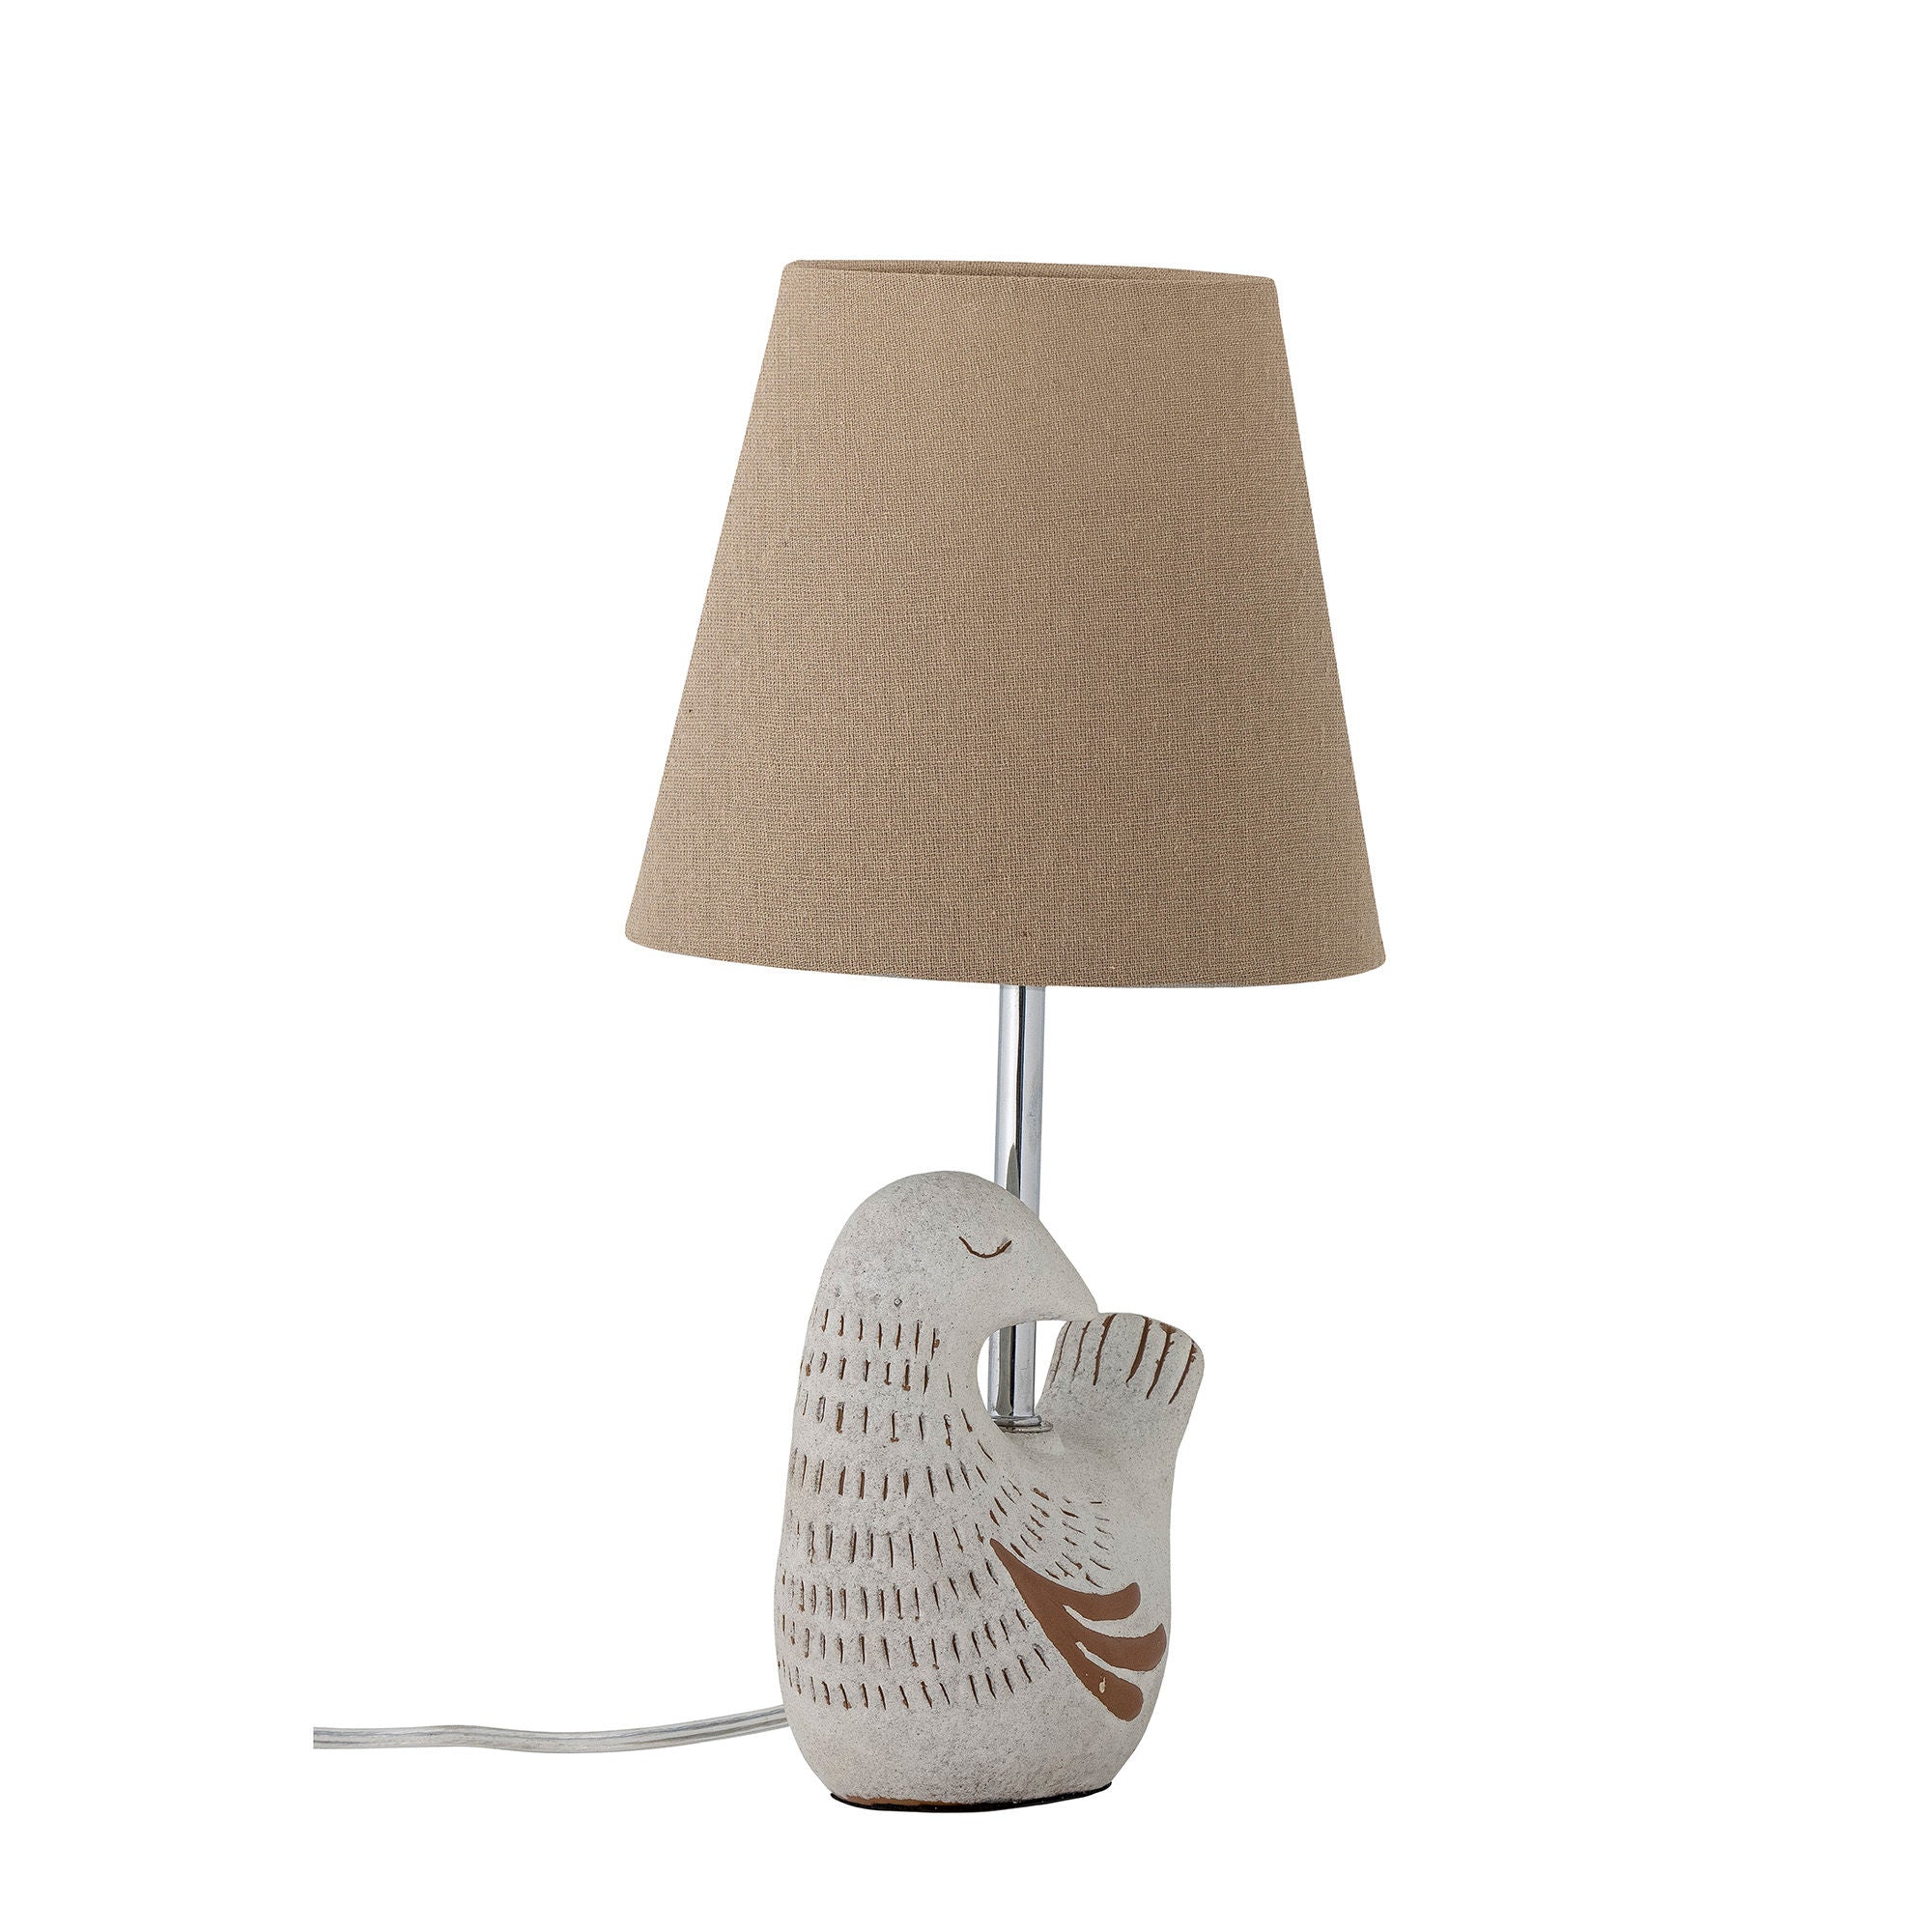 Bloomingville Kylie Table lamp, Nature, Stoneware